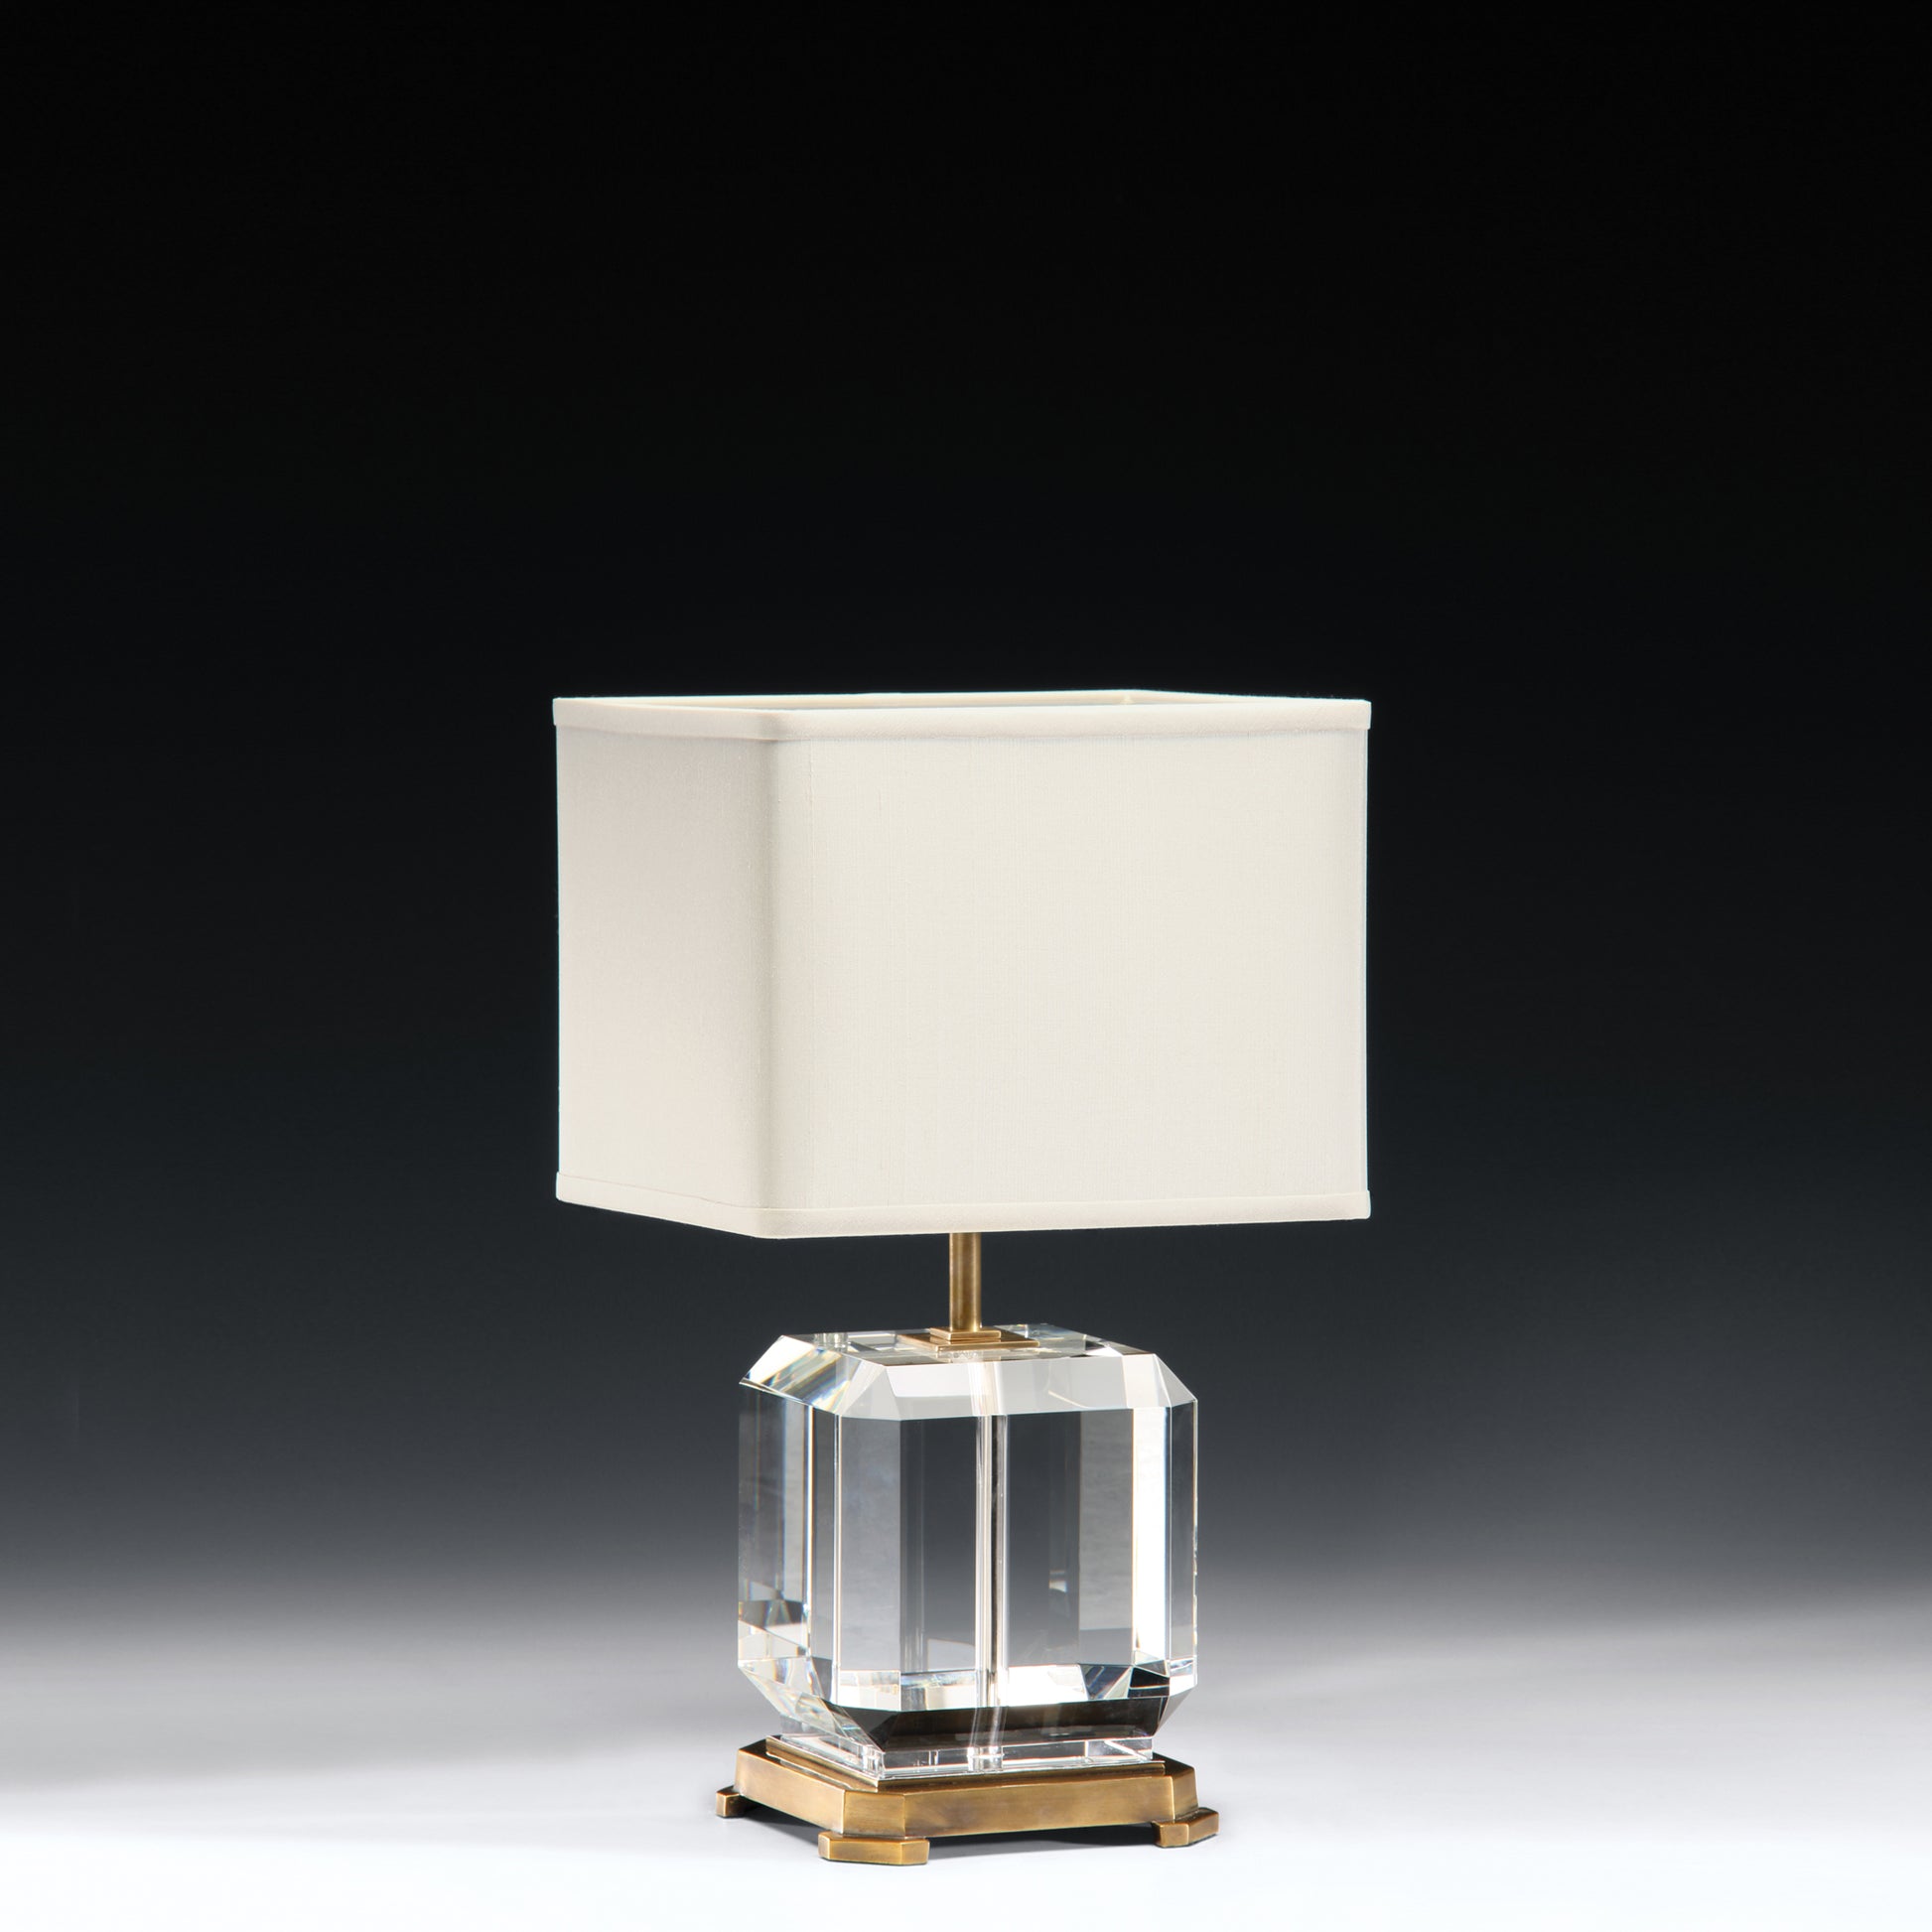 Short crystal table lamp with antique brass accent and modern square shade.